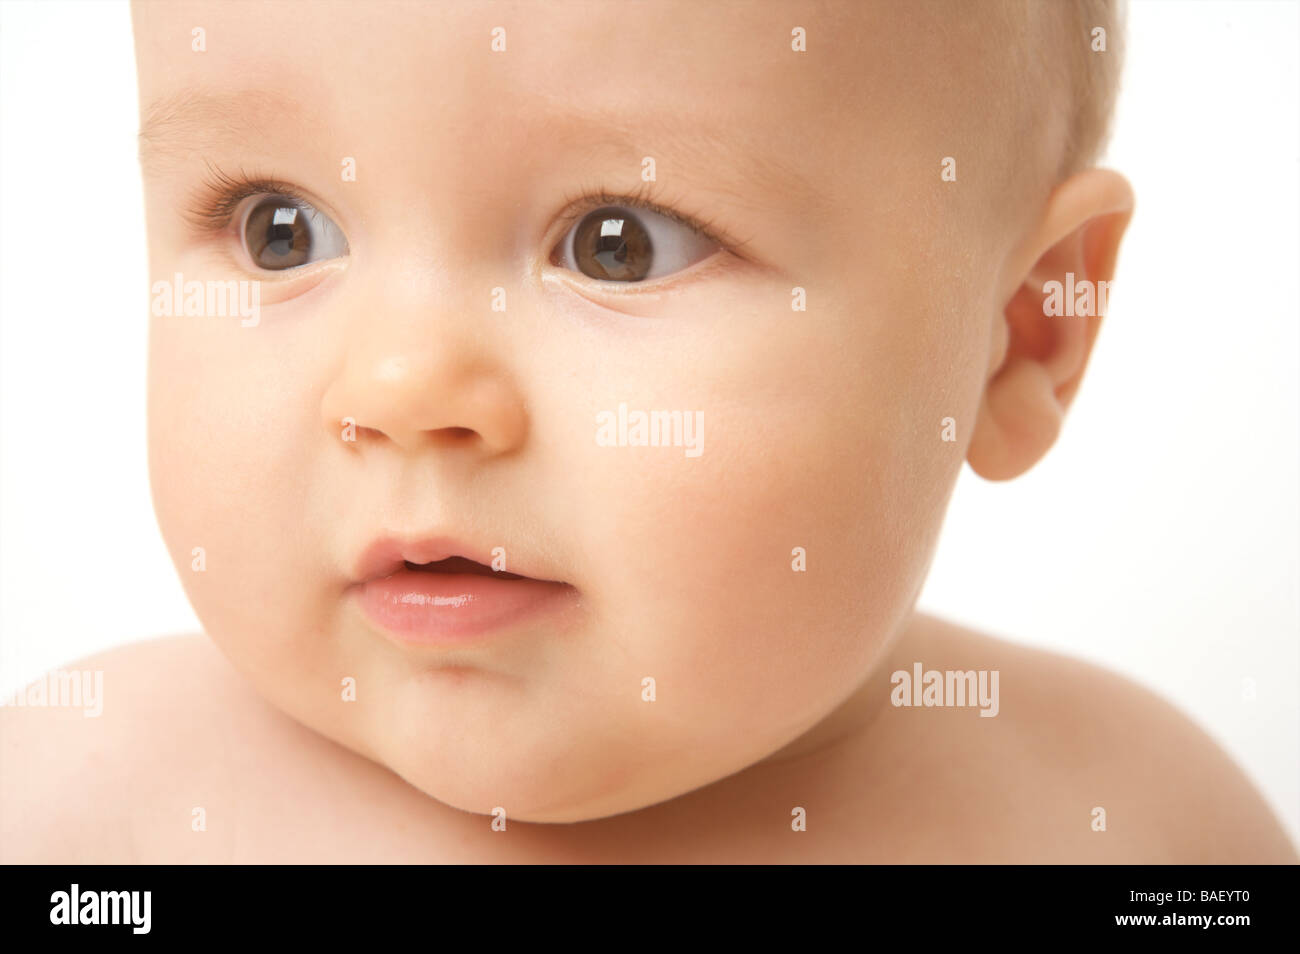 A baby looks against a white backdrop Stock Photo